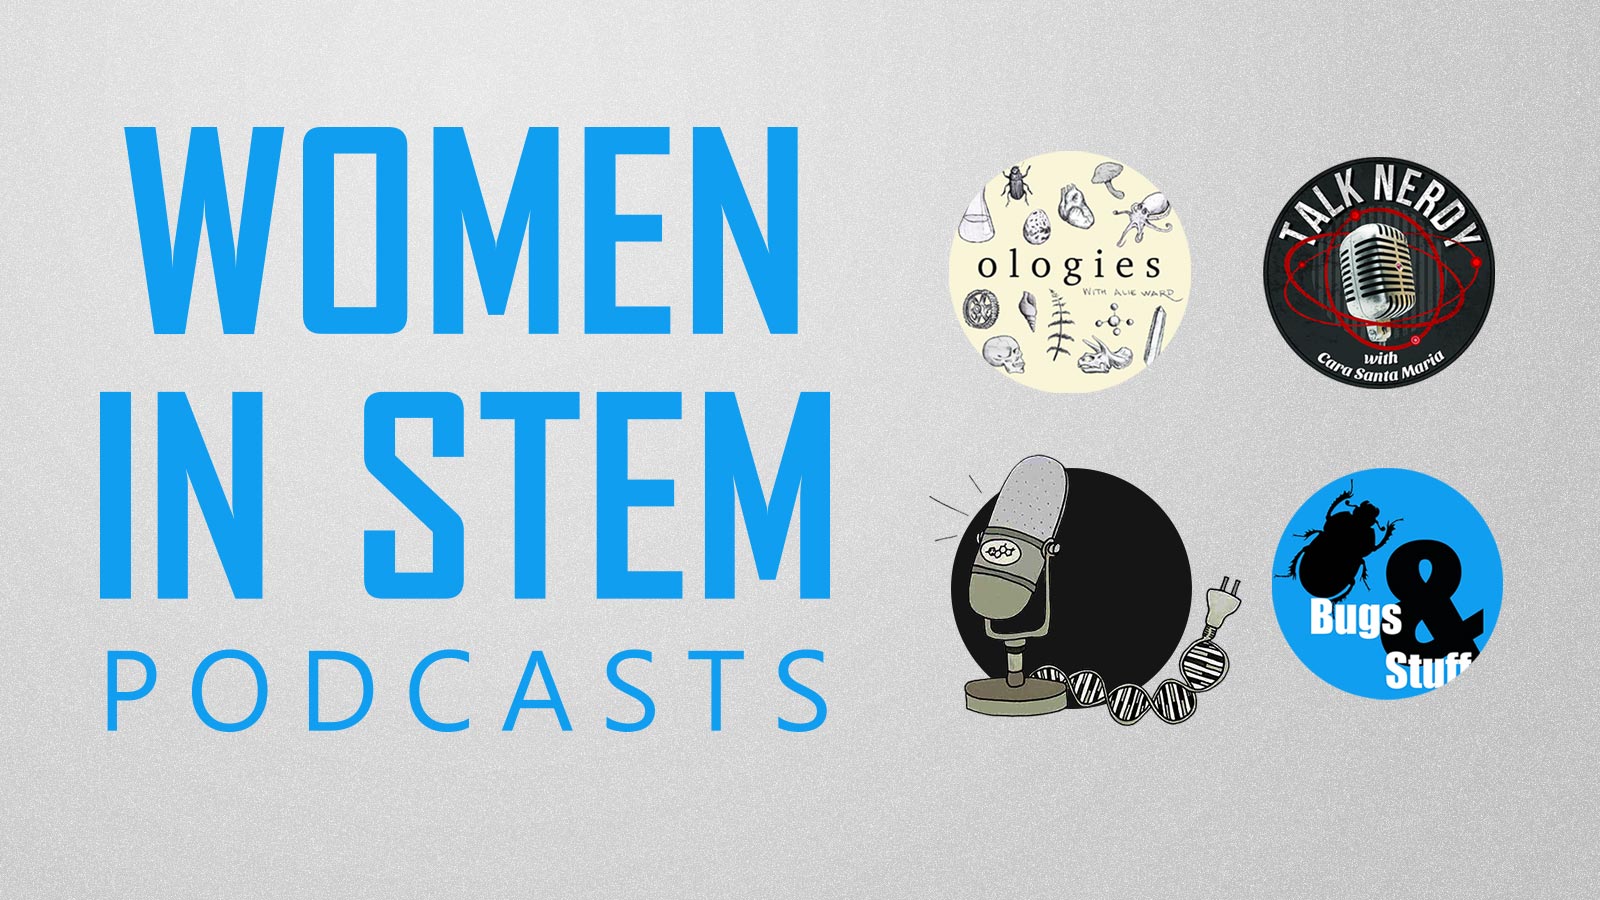 Women in STEM Podcasts